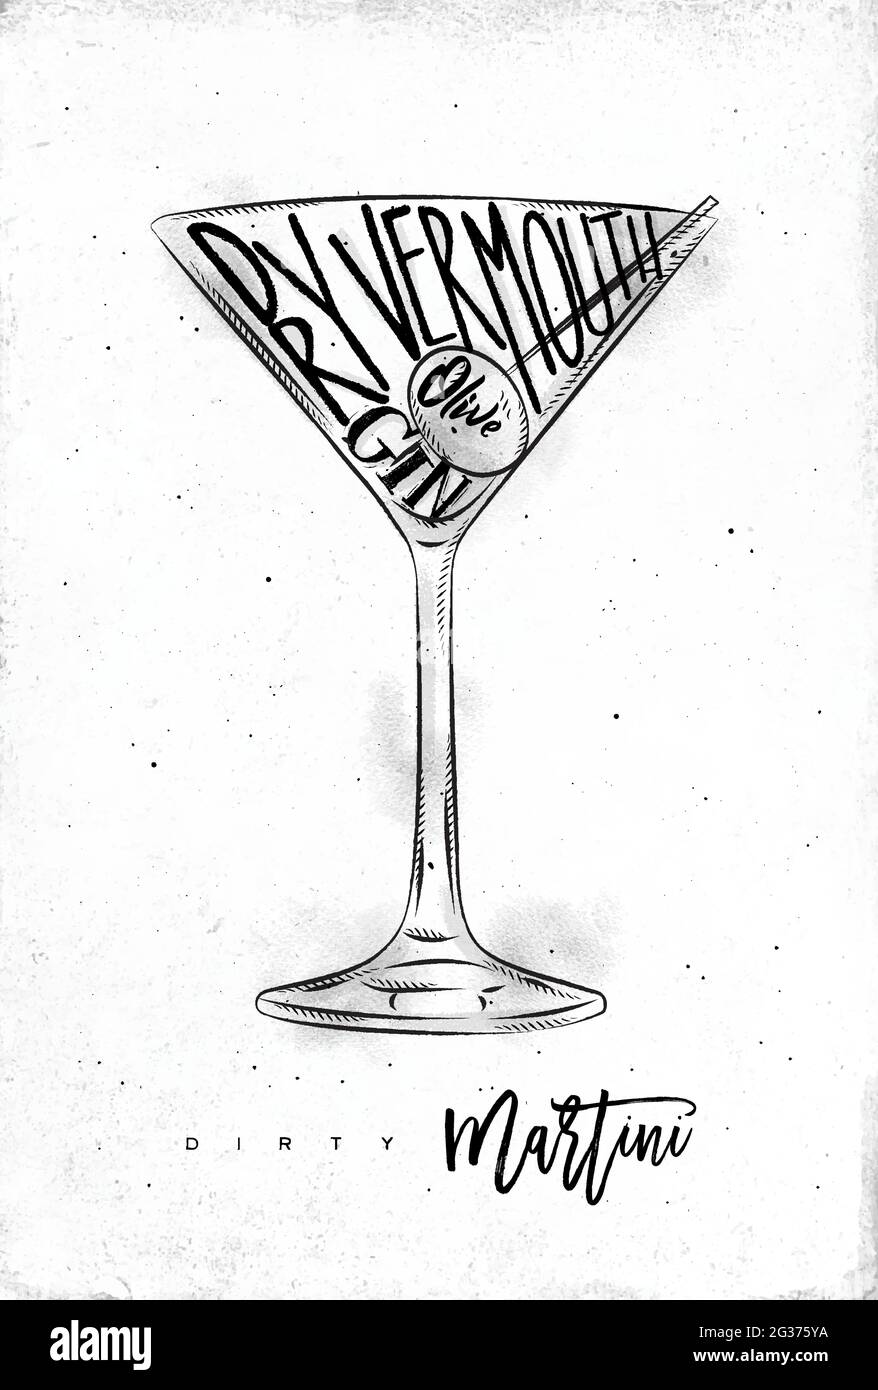 Dirty martini cocktail lettering dry vermouth, gin, olive in vintage graphic style drawing on dirty paper background Stock Vector